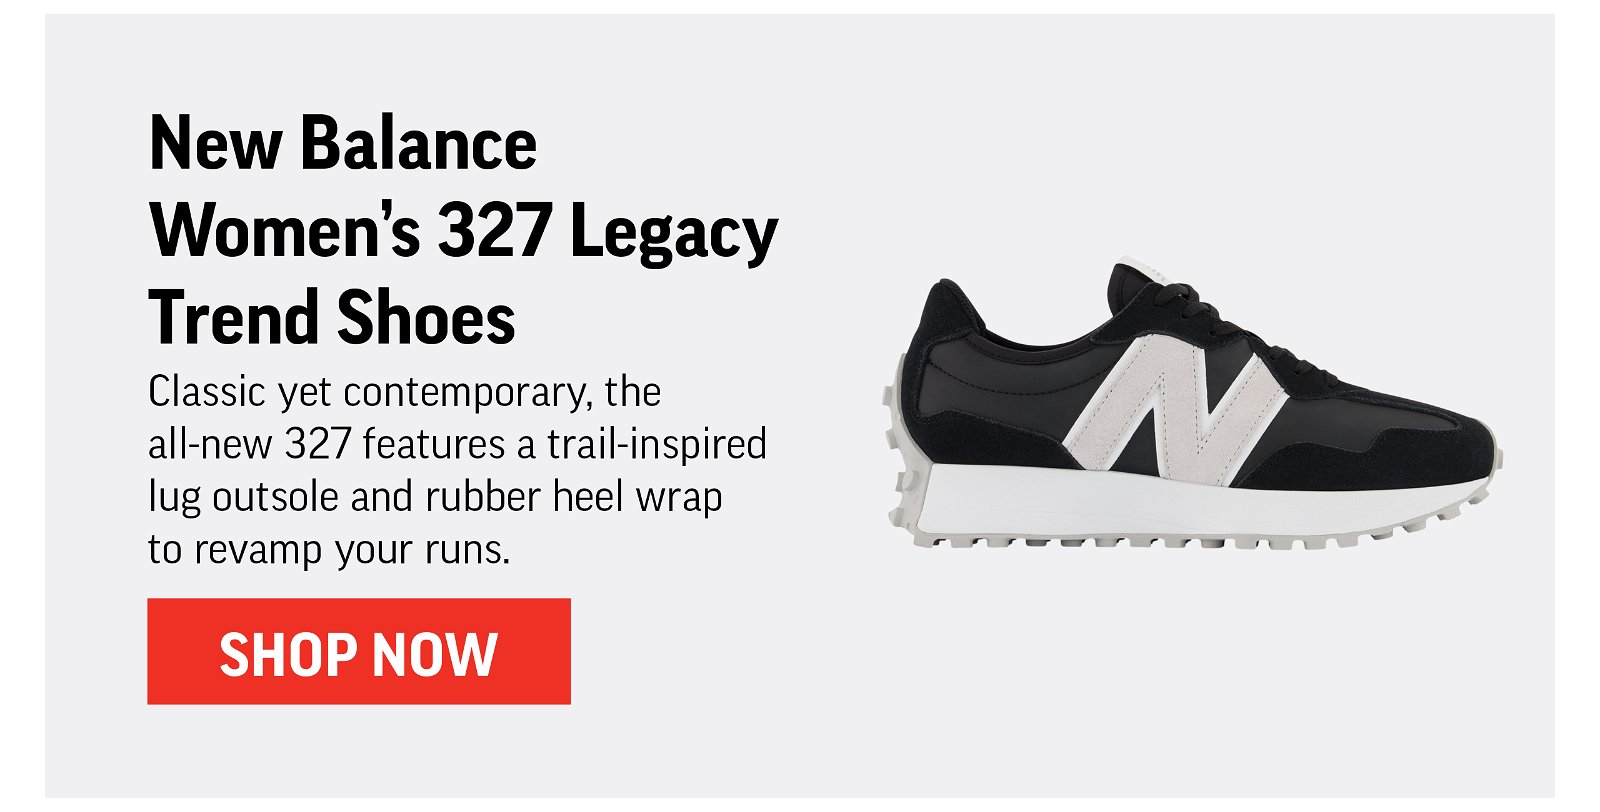 New Balance Women's 327 Legacy Trend Shoes 